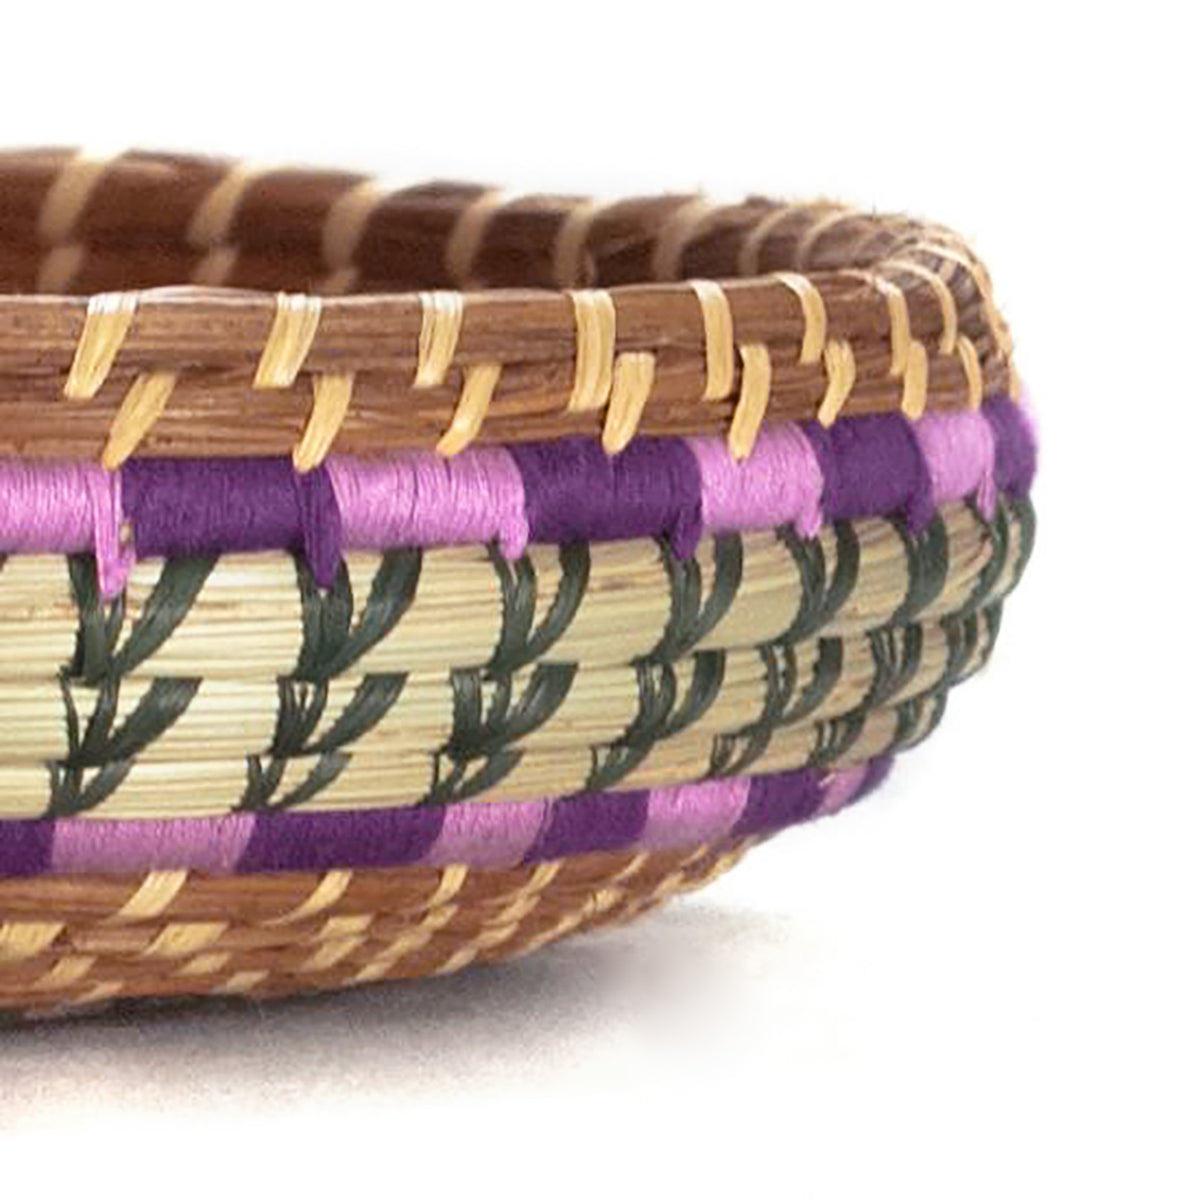 detail of pine needle basket with purple and green accents